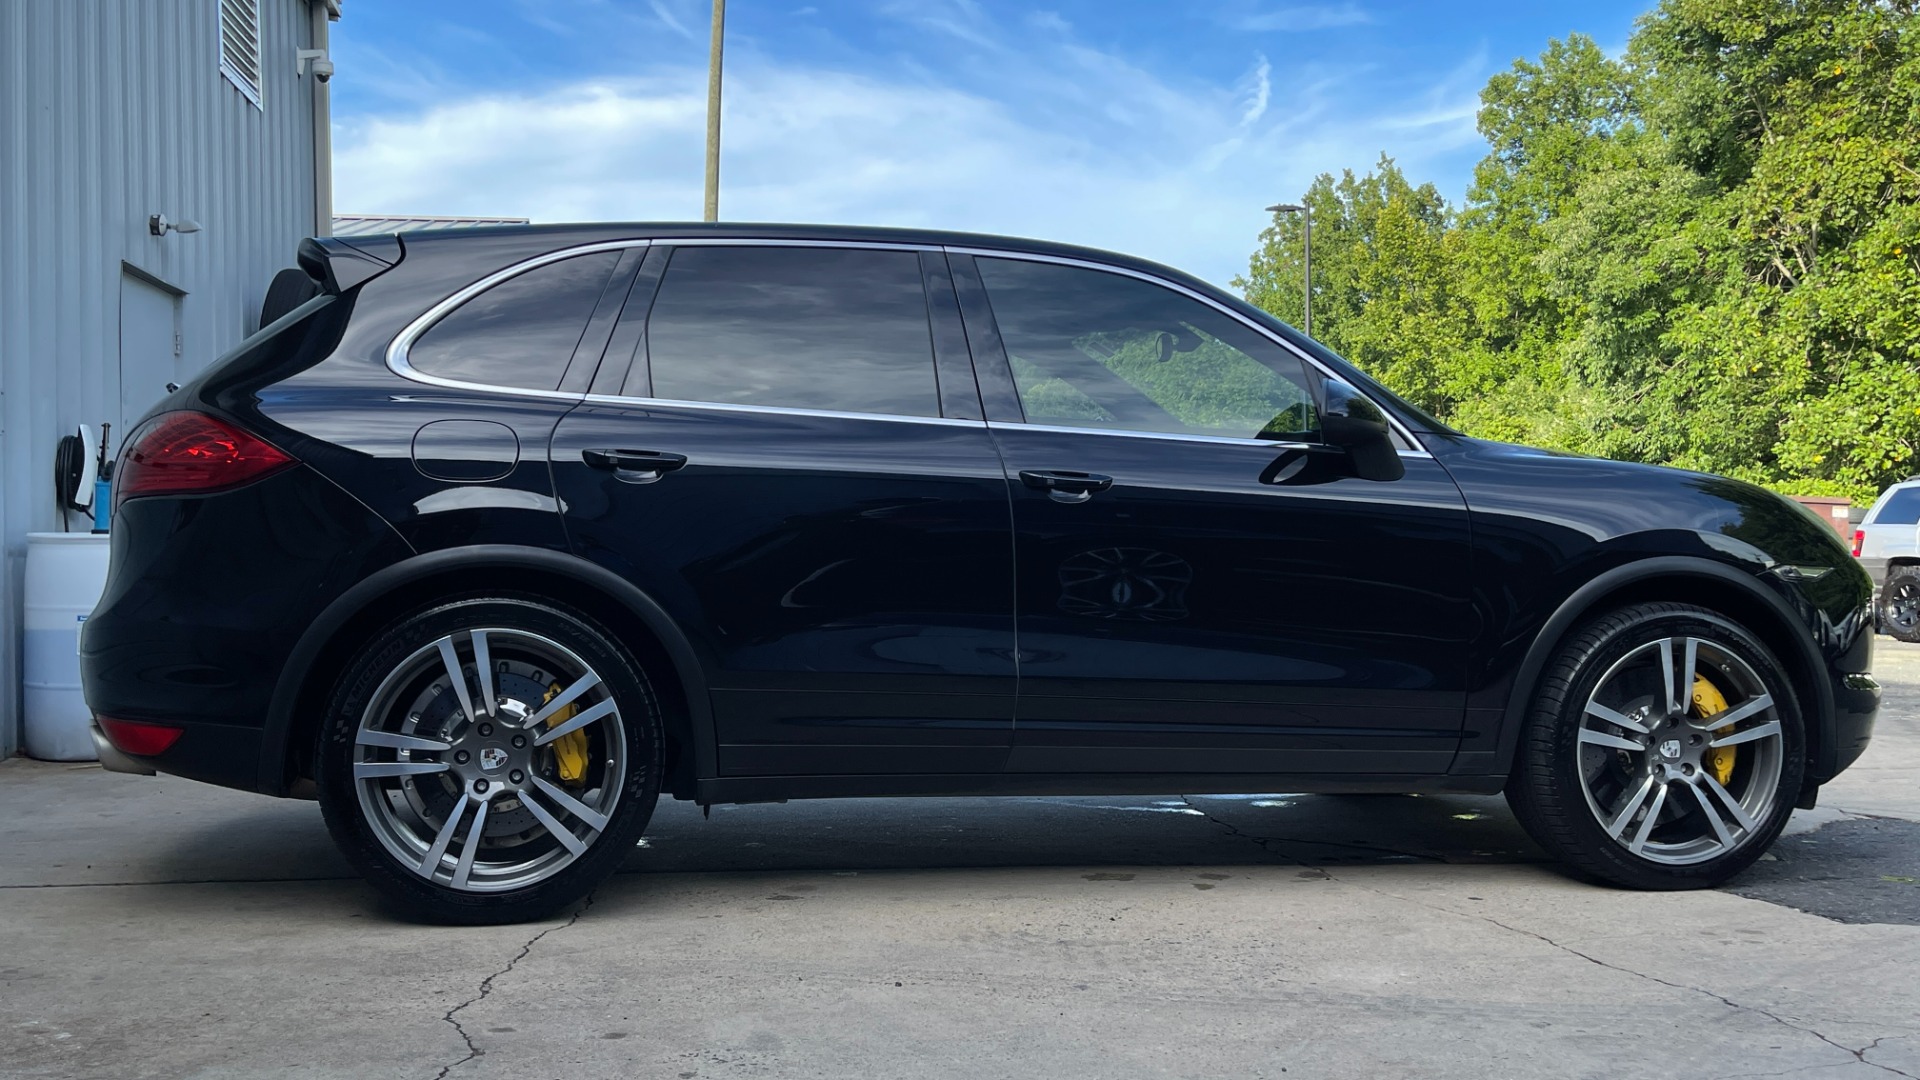 Used 2011 Porsche Cayenne Turbo / CARBON CERAMICS / CARBON FIBER TRIM / 21IN WHEELS / PREMIUM PACKAGE for sale $33,000 at Formula Imports in Charlotte NC 28227 11